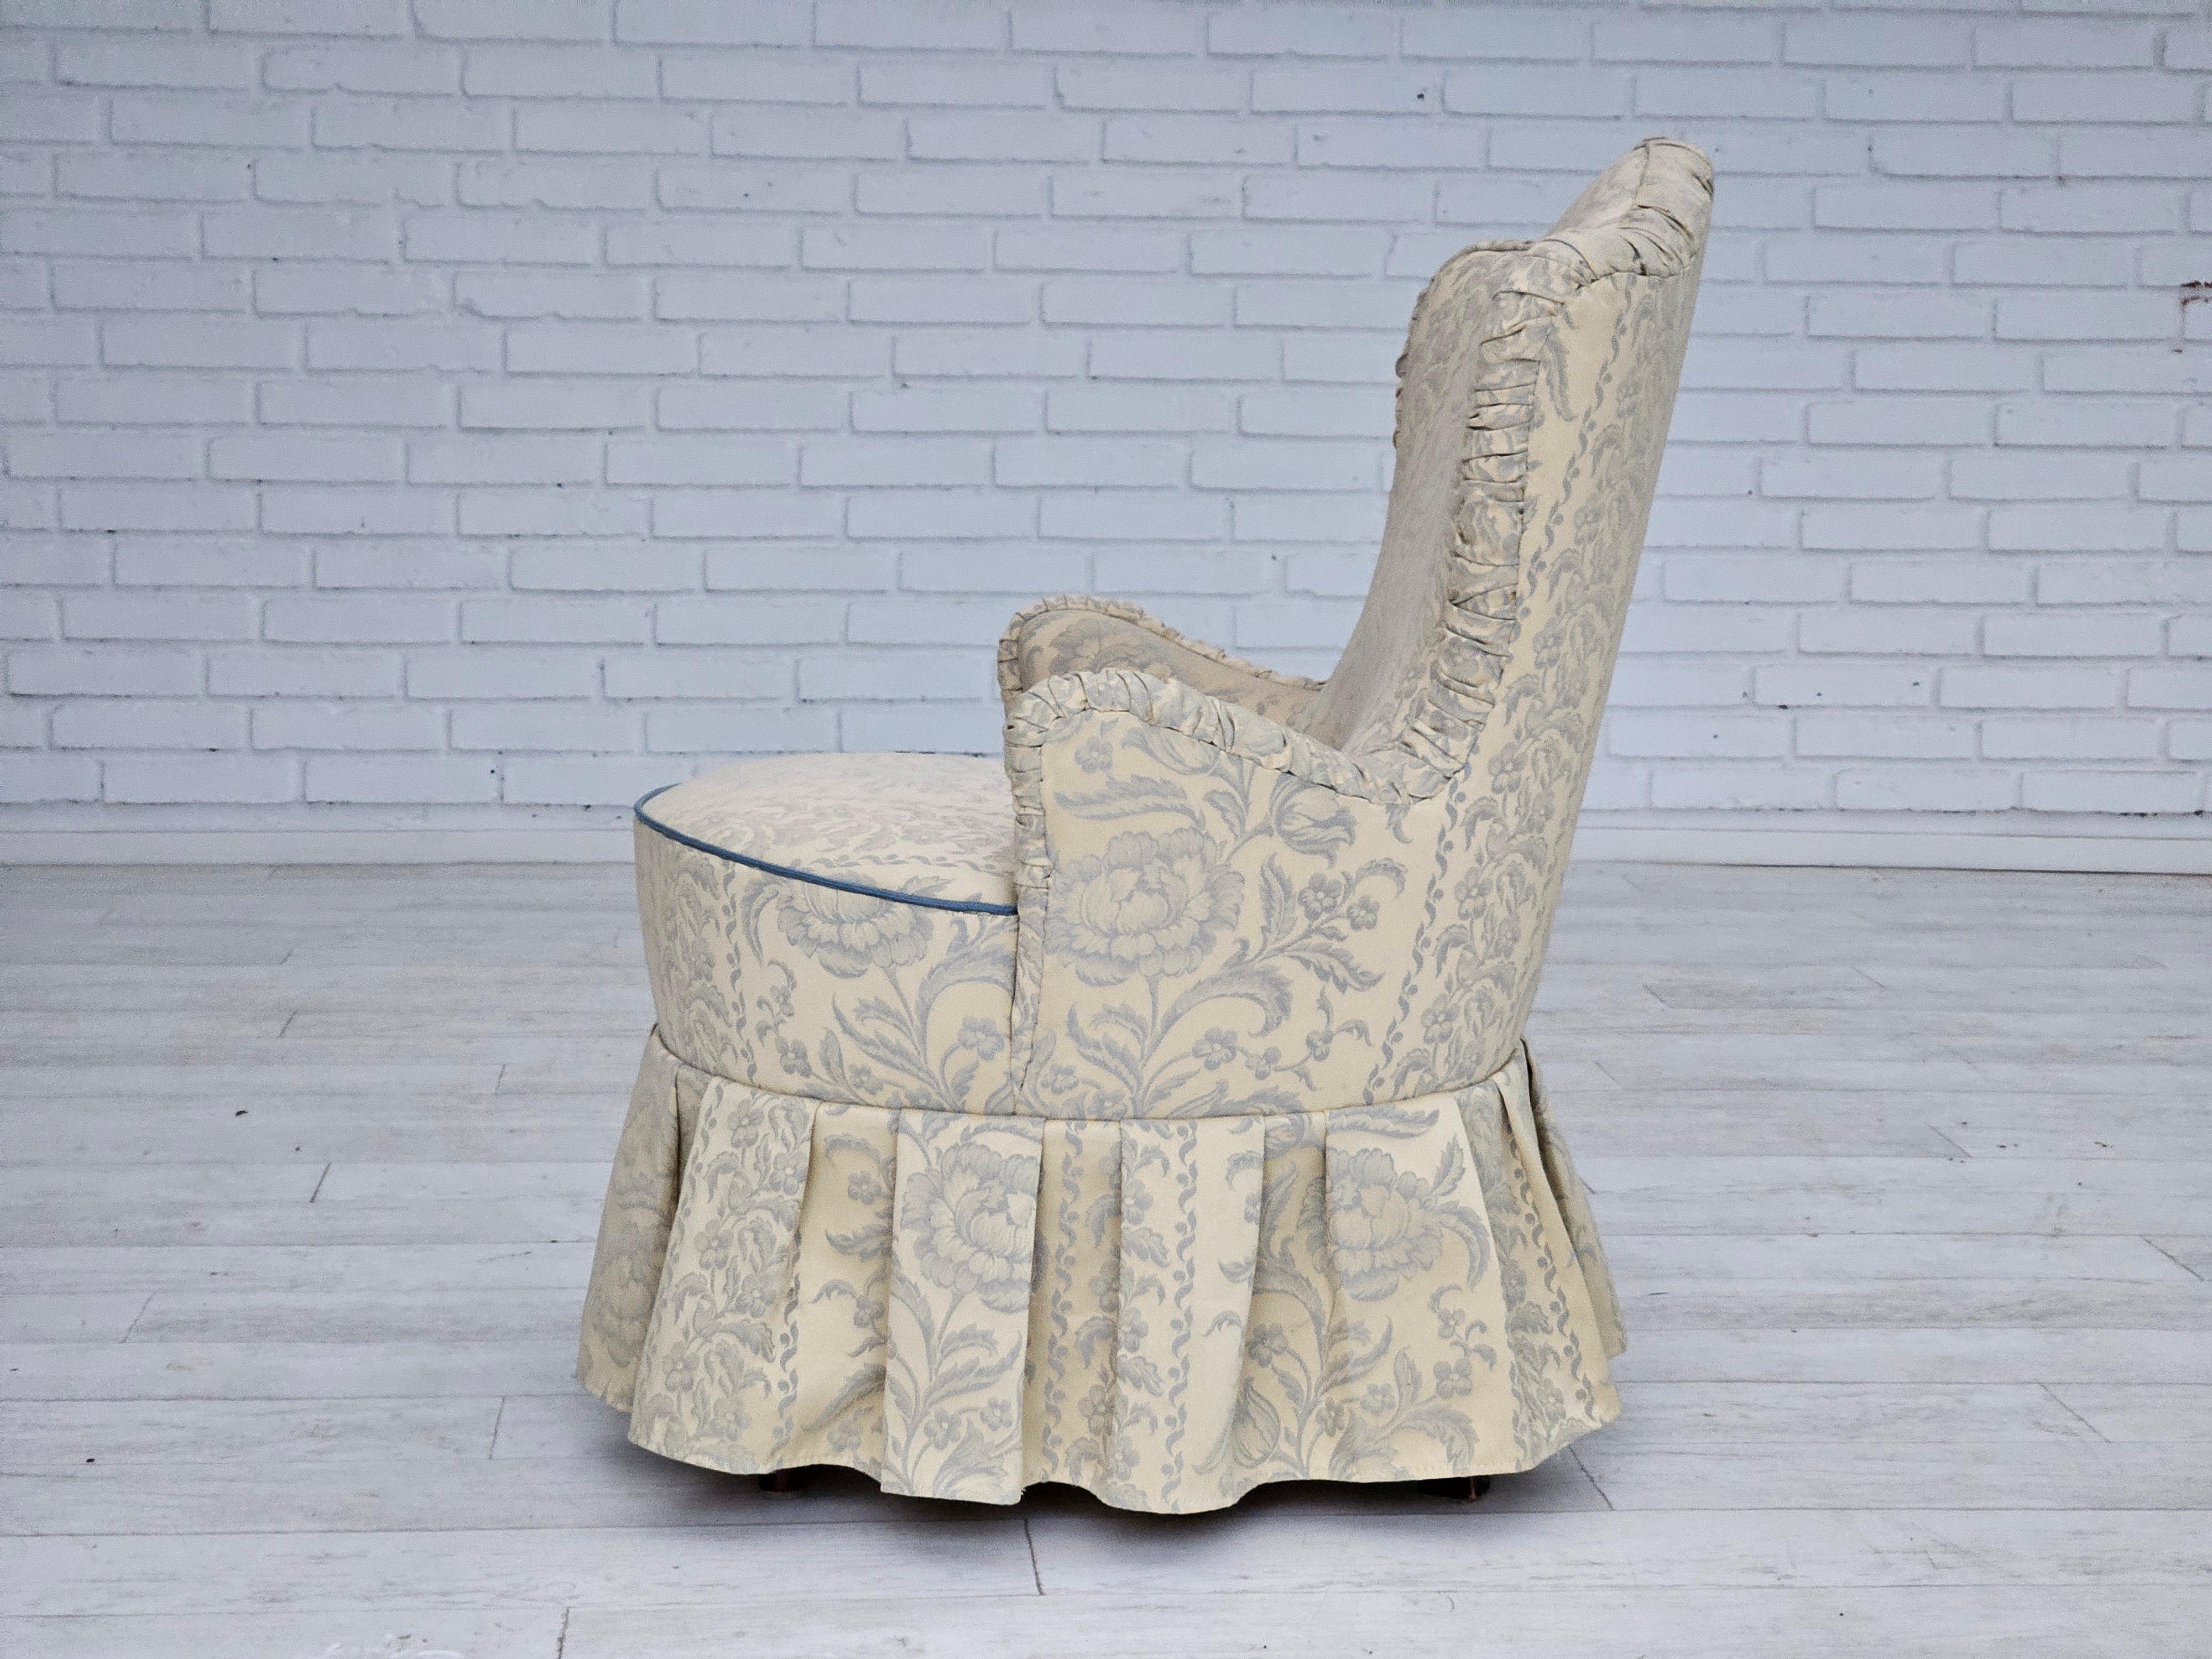 1950s, fauteuil Whiting, reupholstered, creamy/white floral fabric. en vente 7